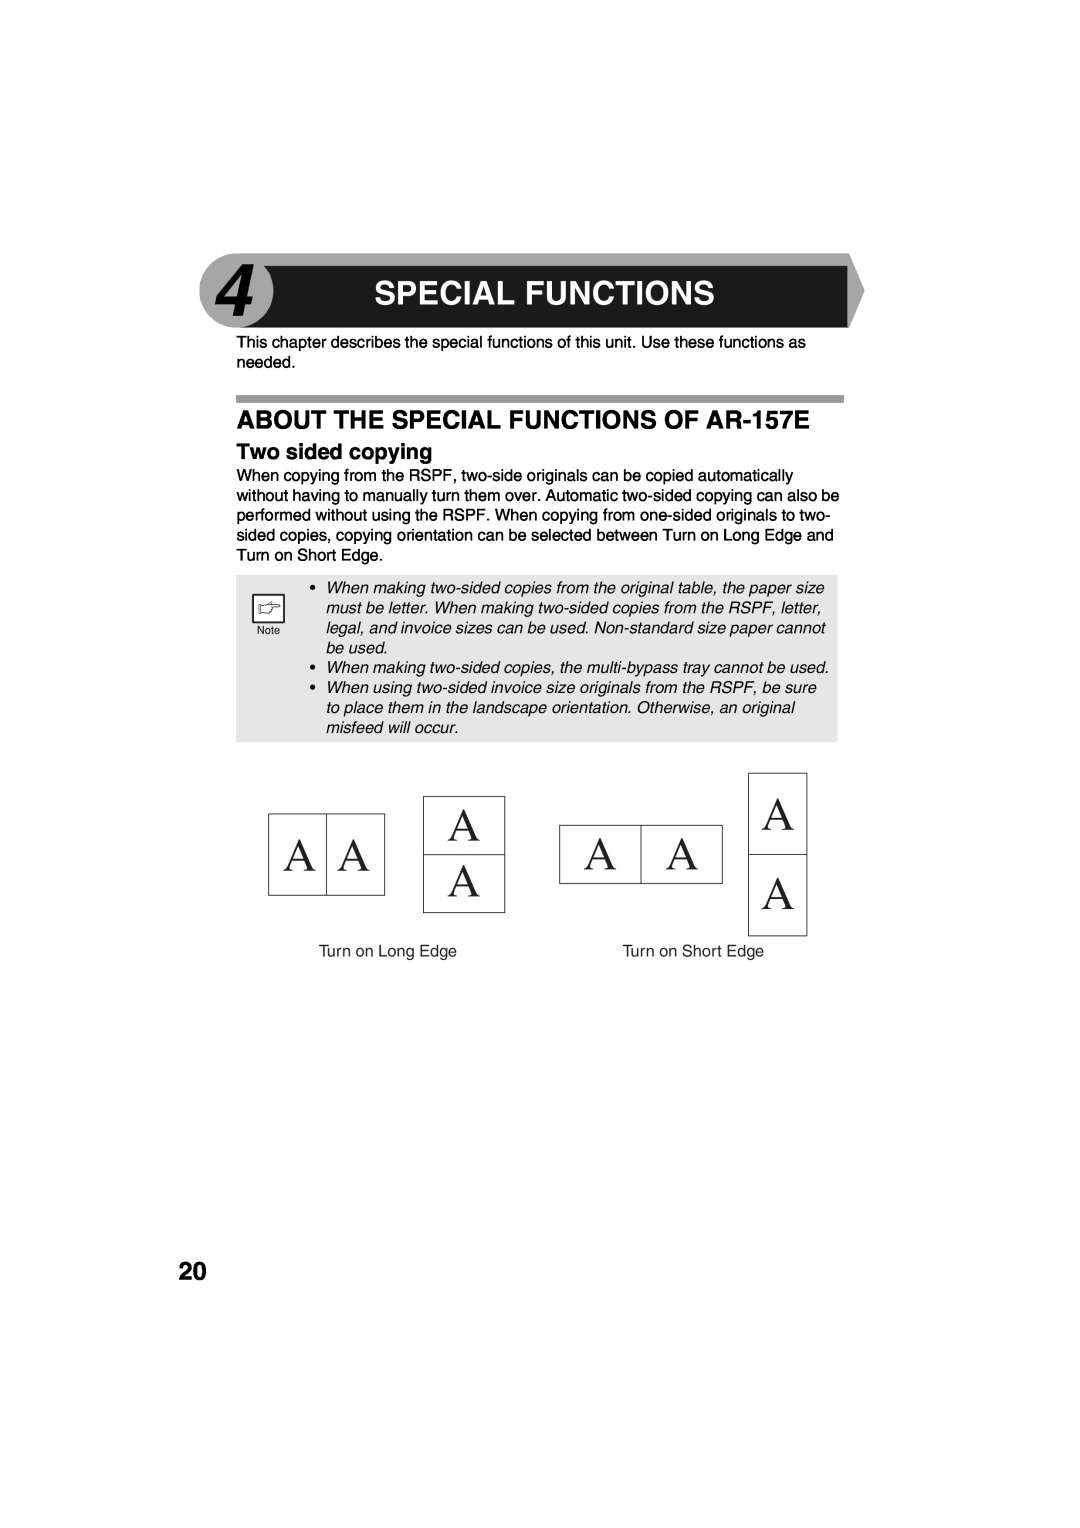 Sharp AR-153E operation manual Special Functions, ABOUT THE SPECIAL FUNCTIONS OF AR-157E, A A A A 